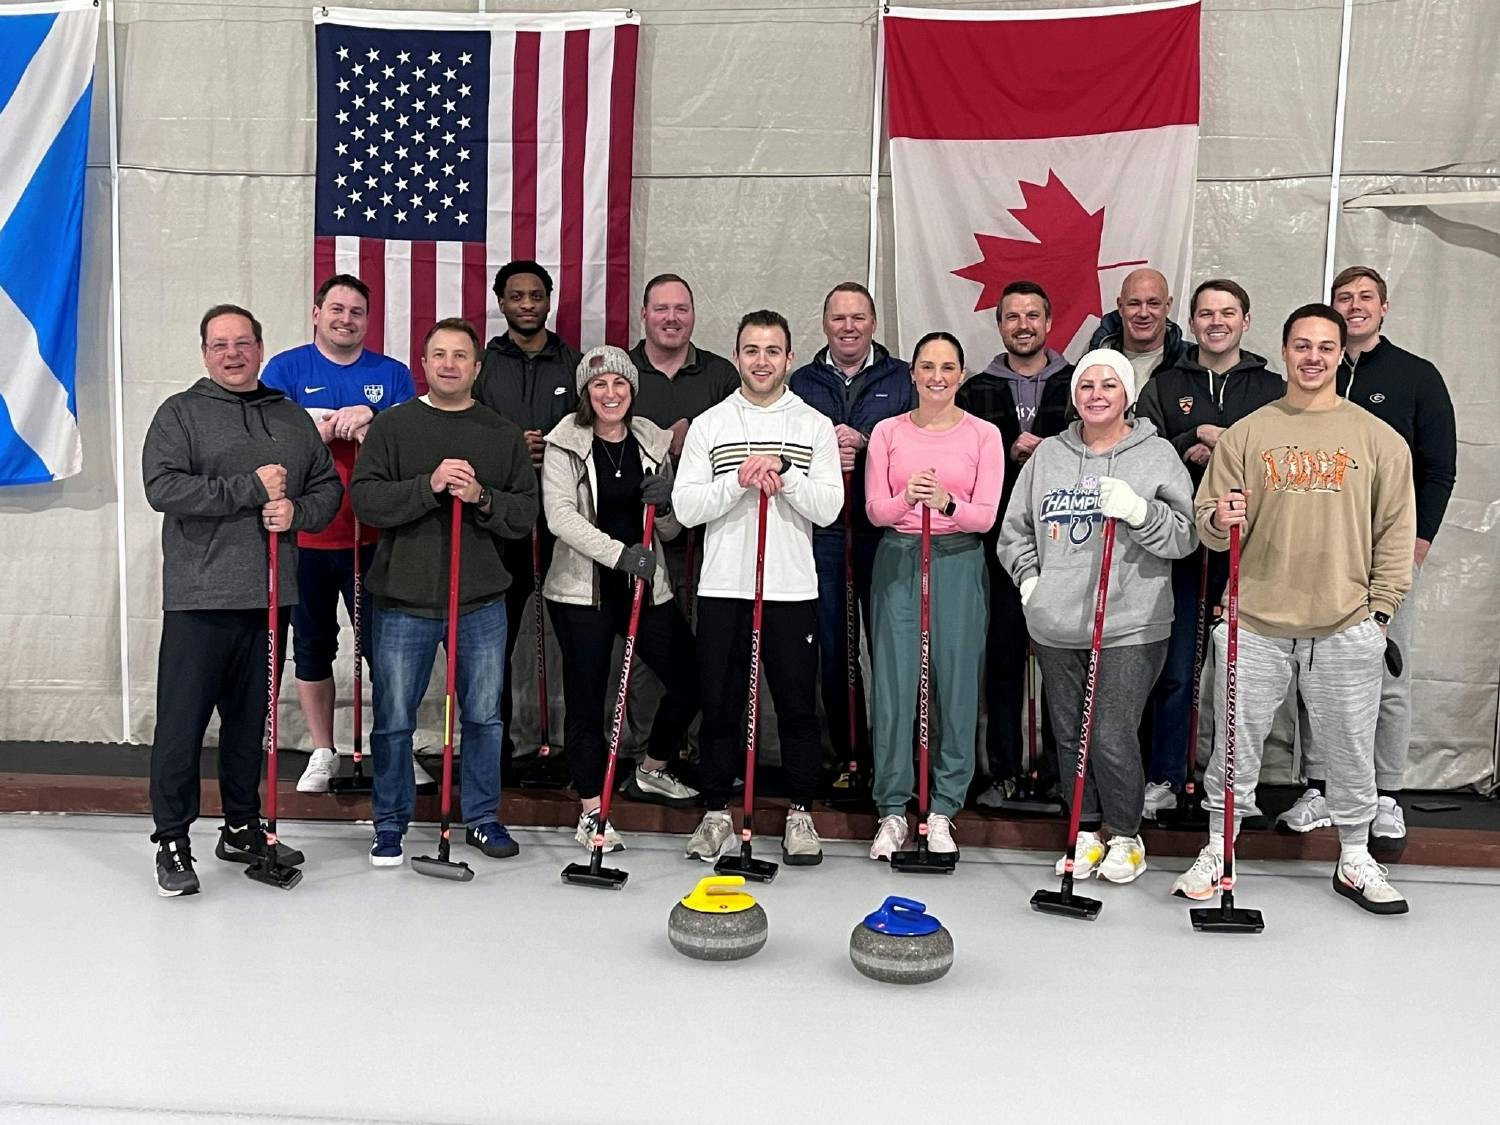 Our Investments team took teambuilding to the ice rink with an outing to the Atlanta curling club.